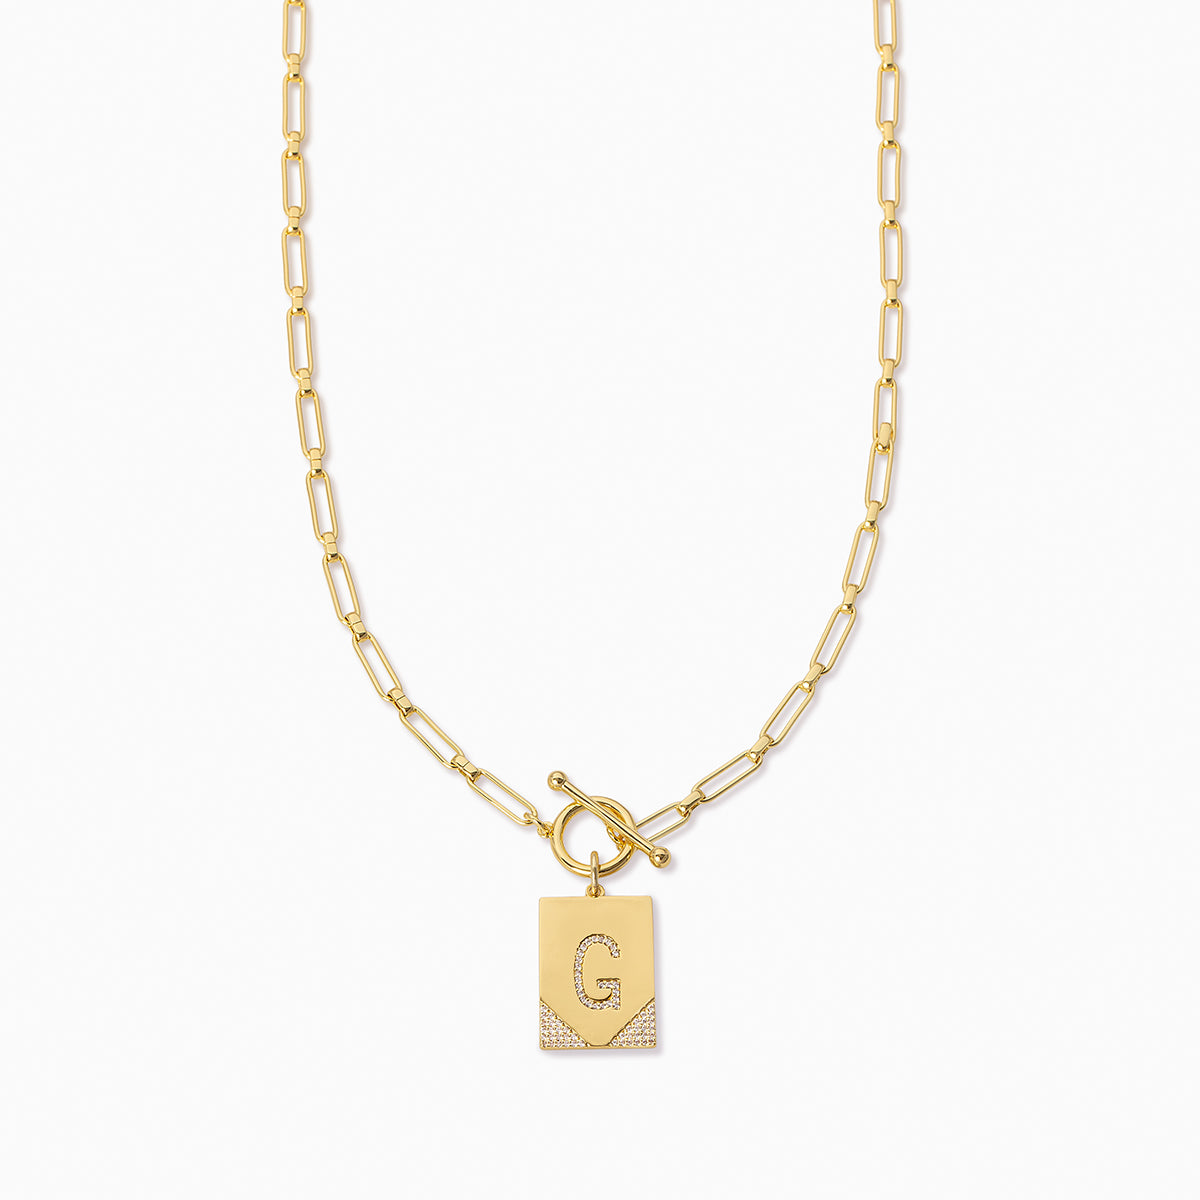 Leave Your Mark Chain Necklace | Gold  G | Product Image | Uncommon James